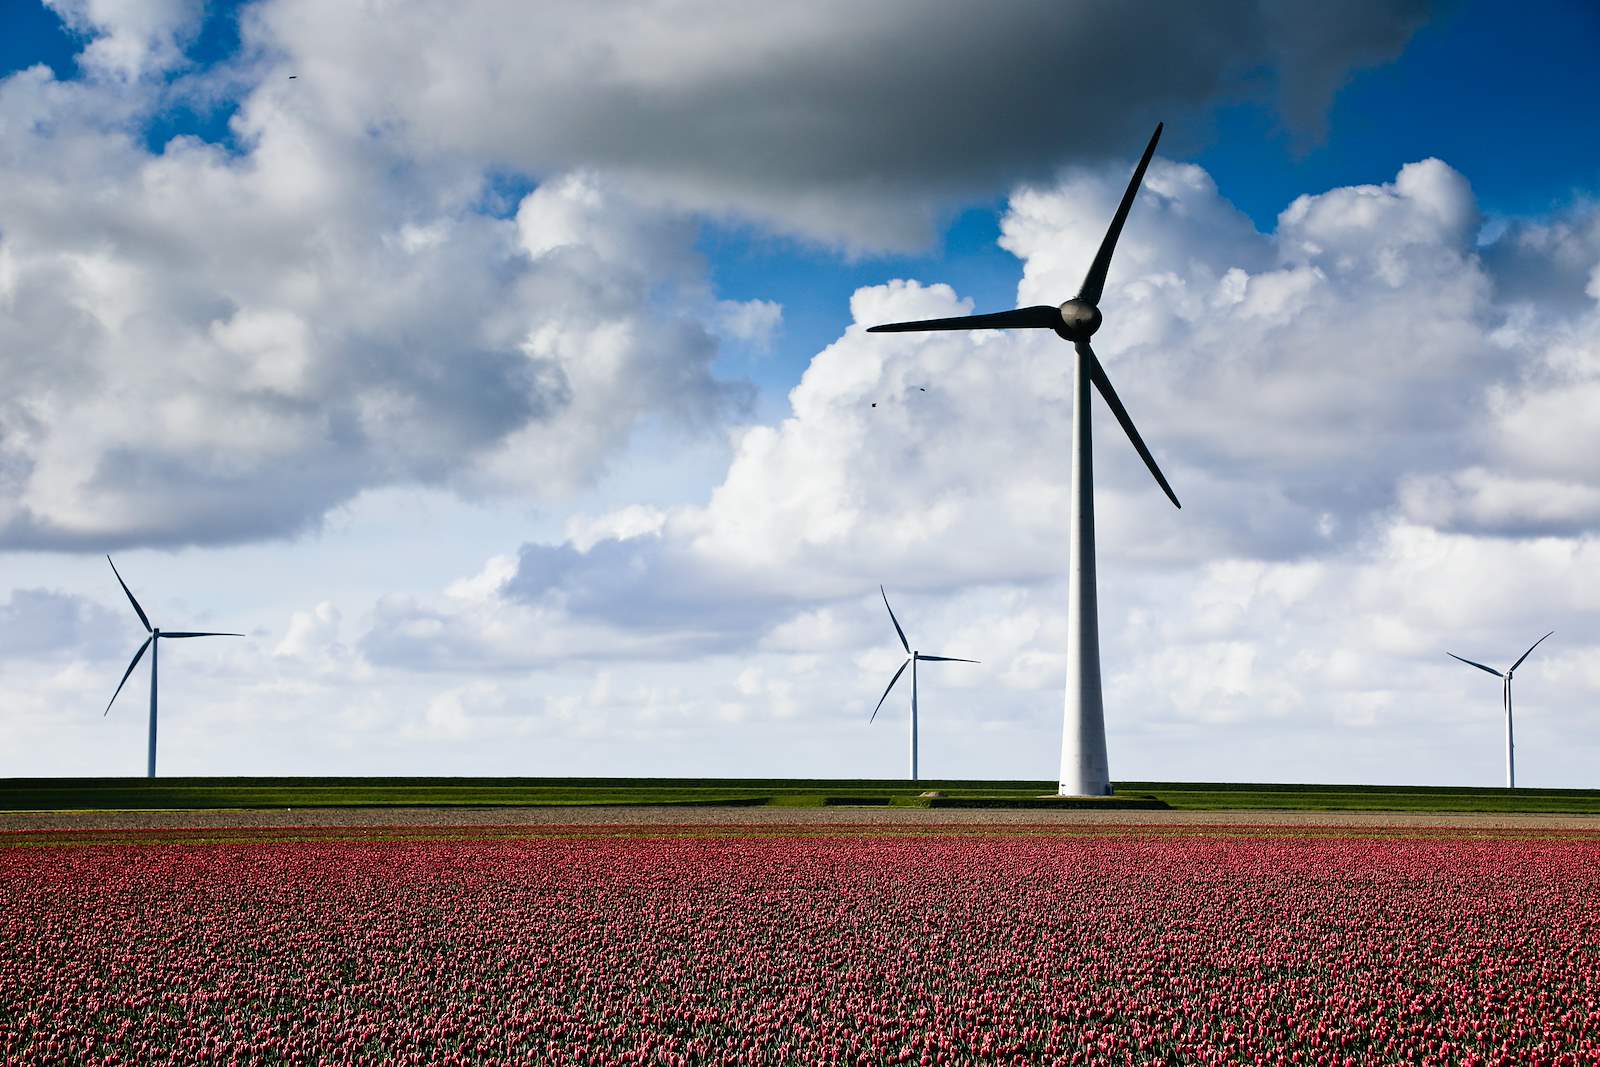 Our offices in Amersfoort, Rotterdam, Eindhoven and Groningen will be getting their energy directly from Windpark Ferrum in IJmuiden, The Netherlands